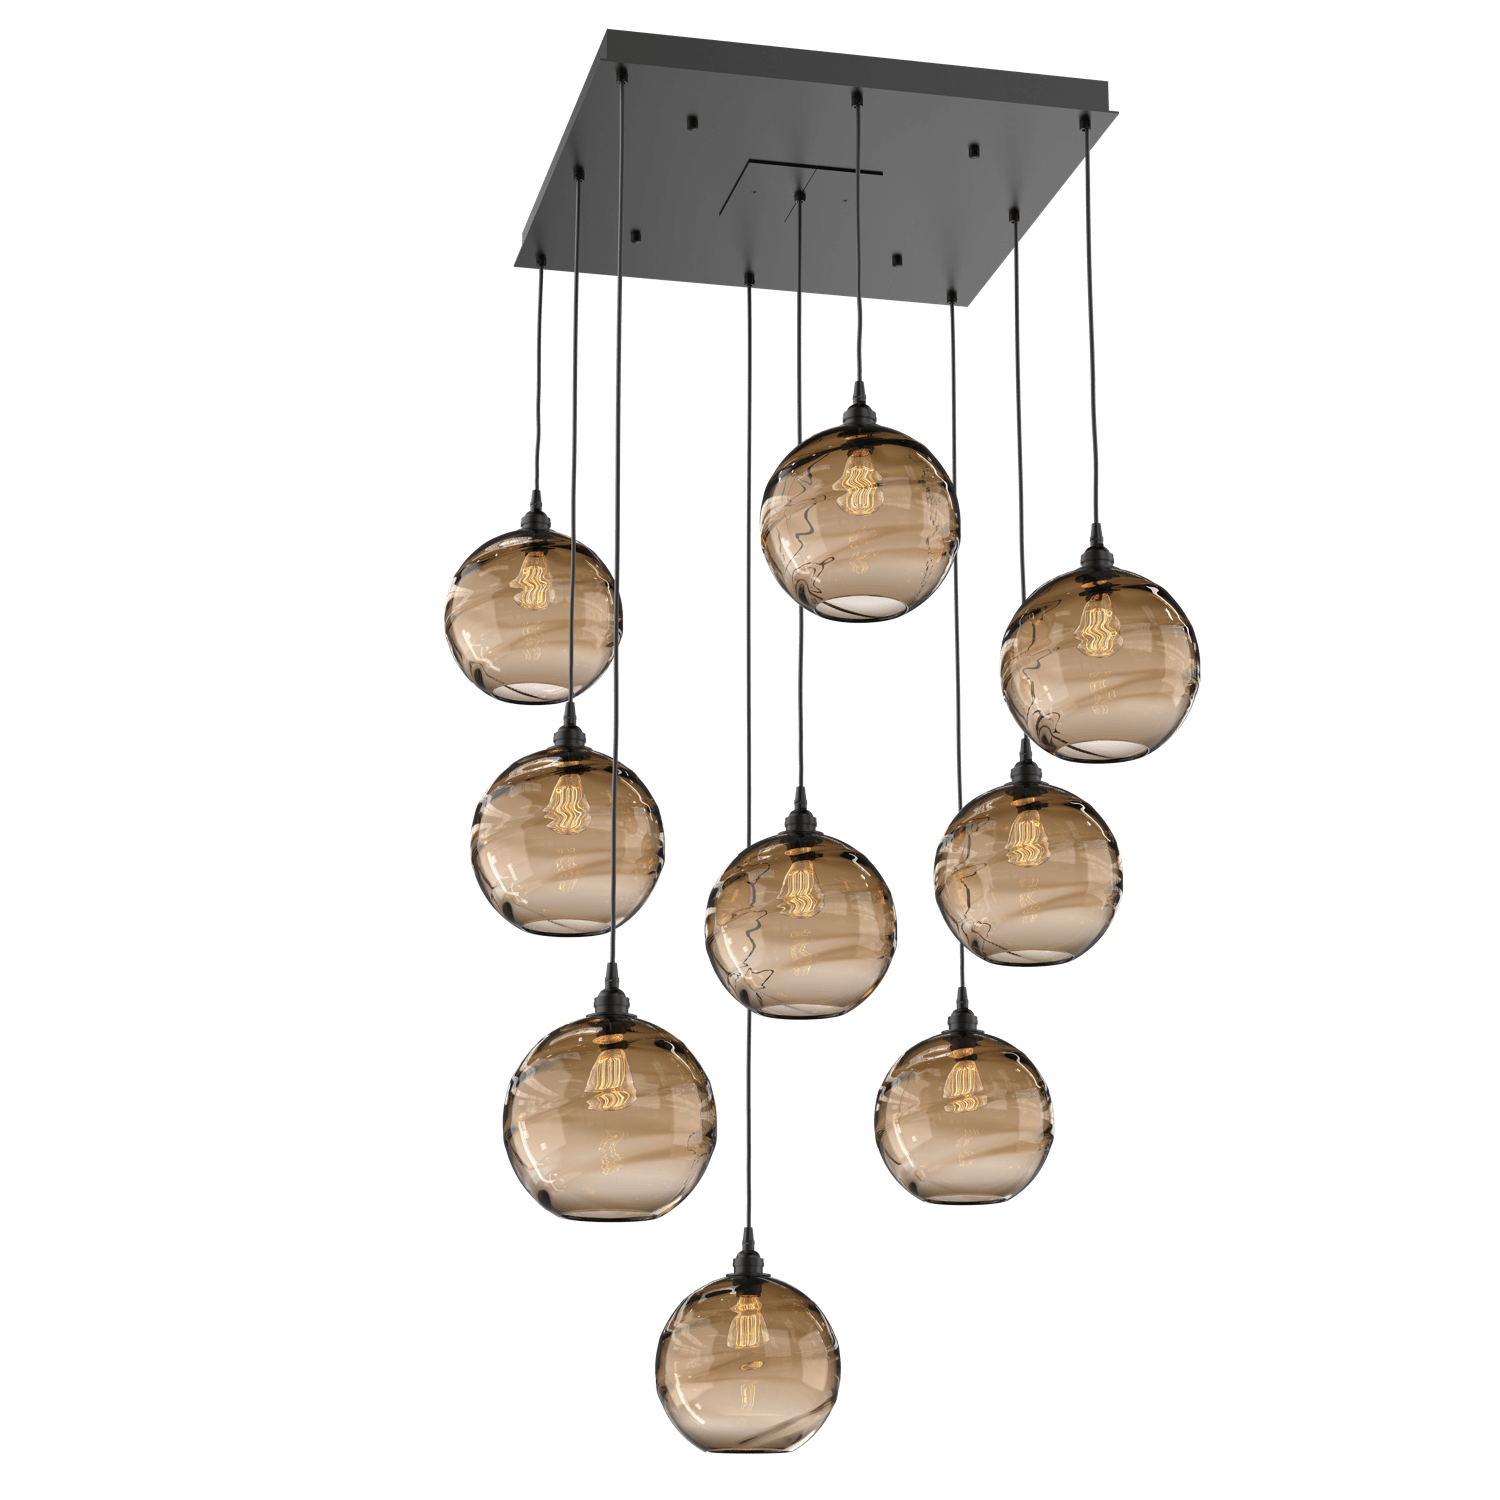 CHB0047-09-MB-OB-Hammerton-Studio-Optic-Blown-Glass-Terra-9-light-square-pendant-chandelier-with-matte-black-finish-and-optic-bronze-blown-glass-shades-and-incandescent-lamping